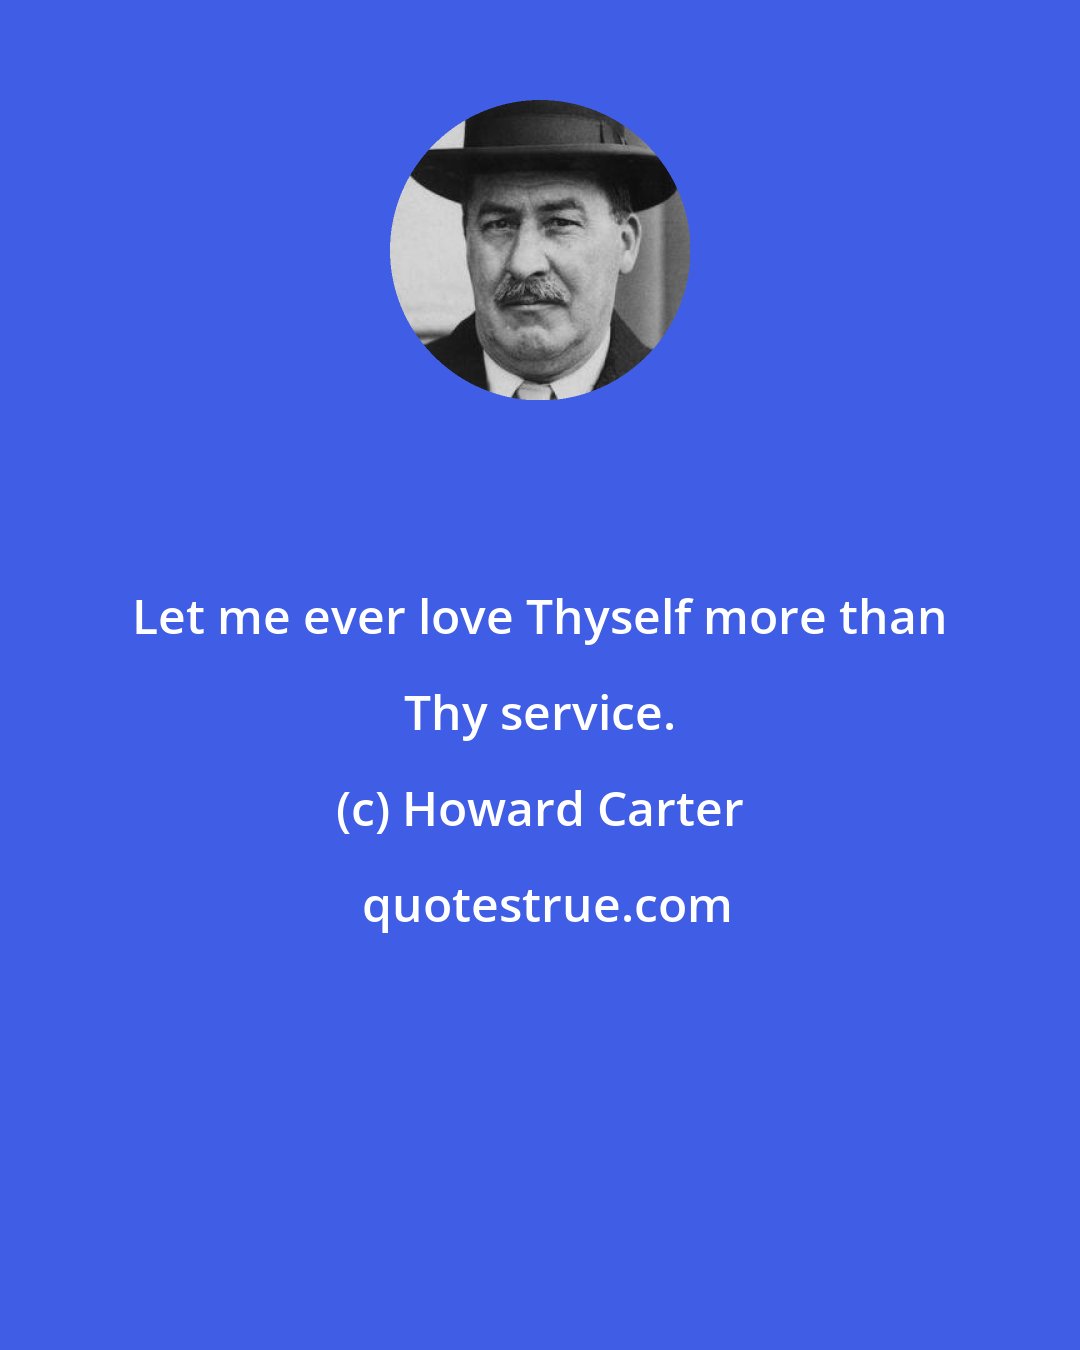 Howard Carter: Let me ever love Thyself more than Thy service.